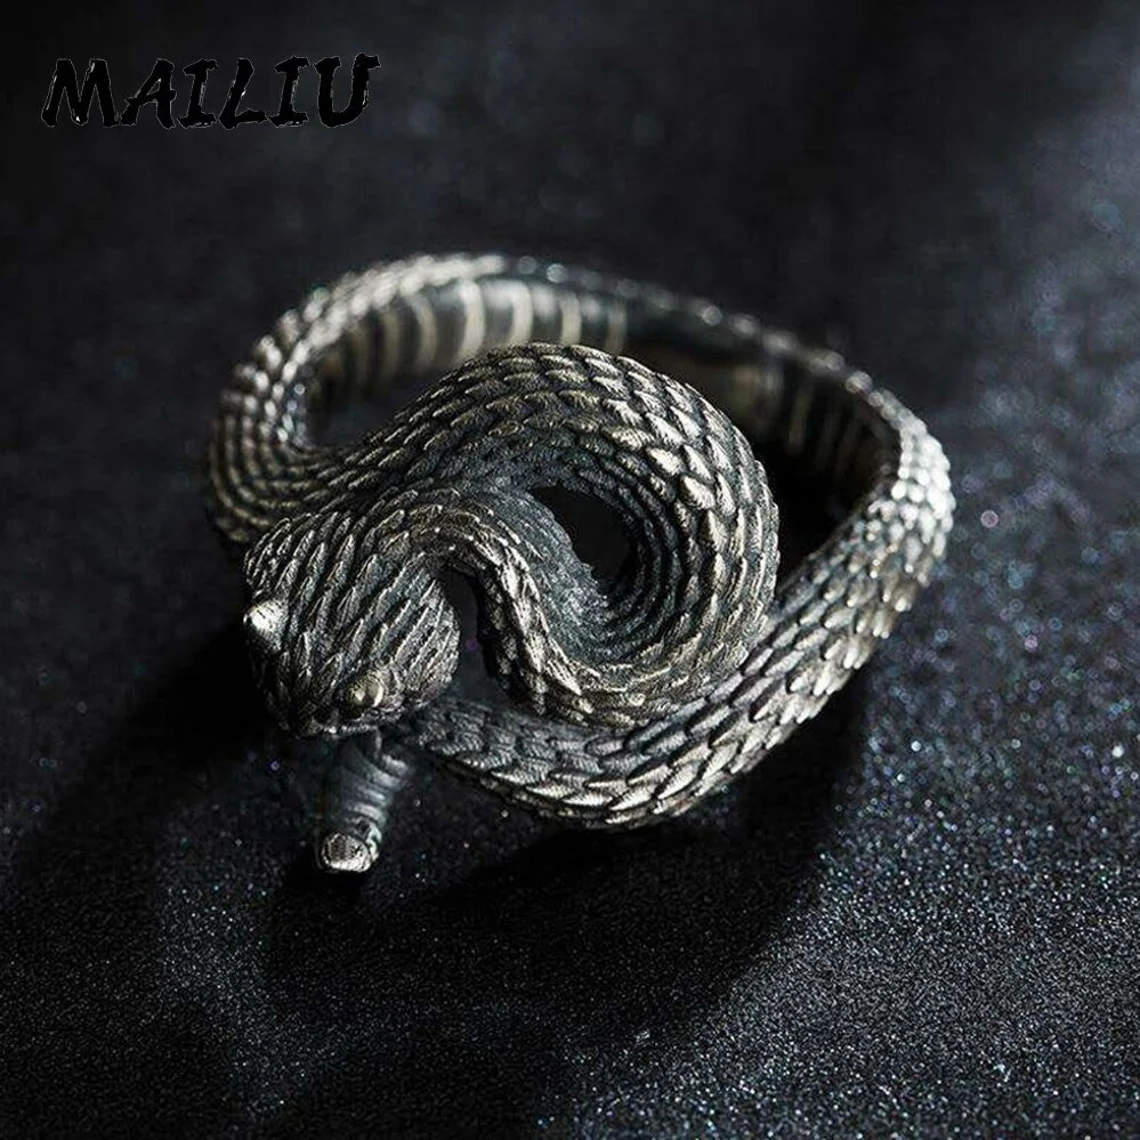 VINTAGE SILVER PLATED RATTLESNAKE ADJUSTABLE GOTHIC RINGS